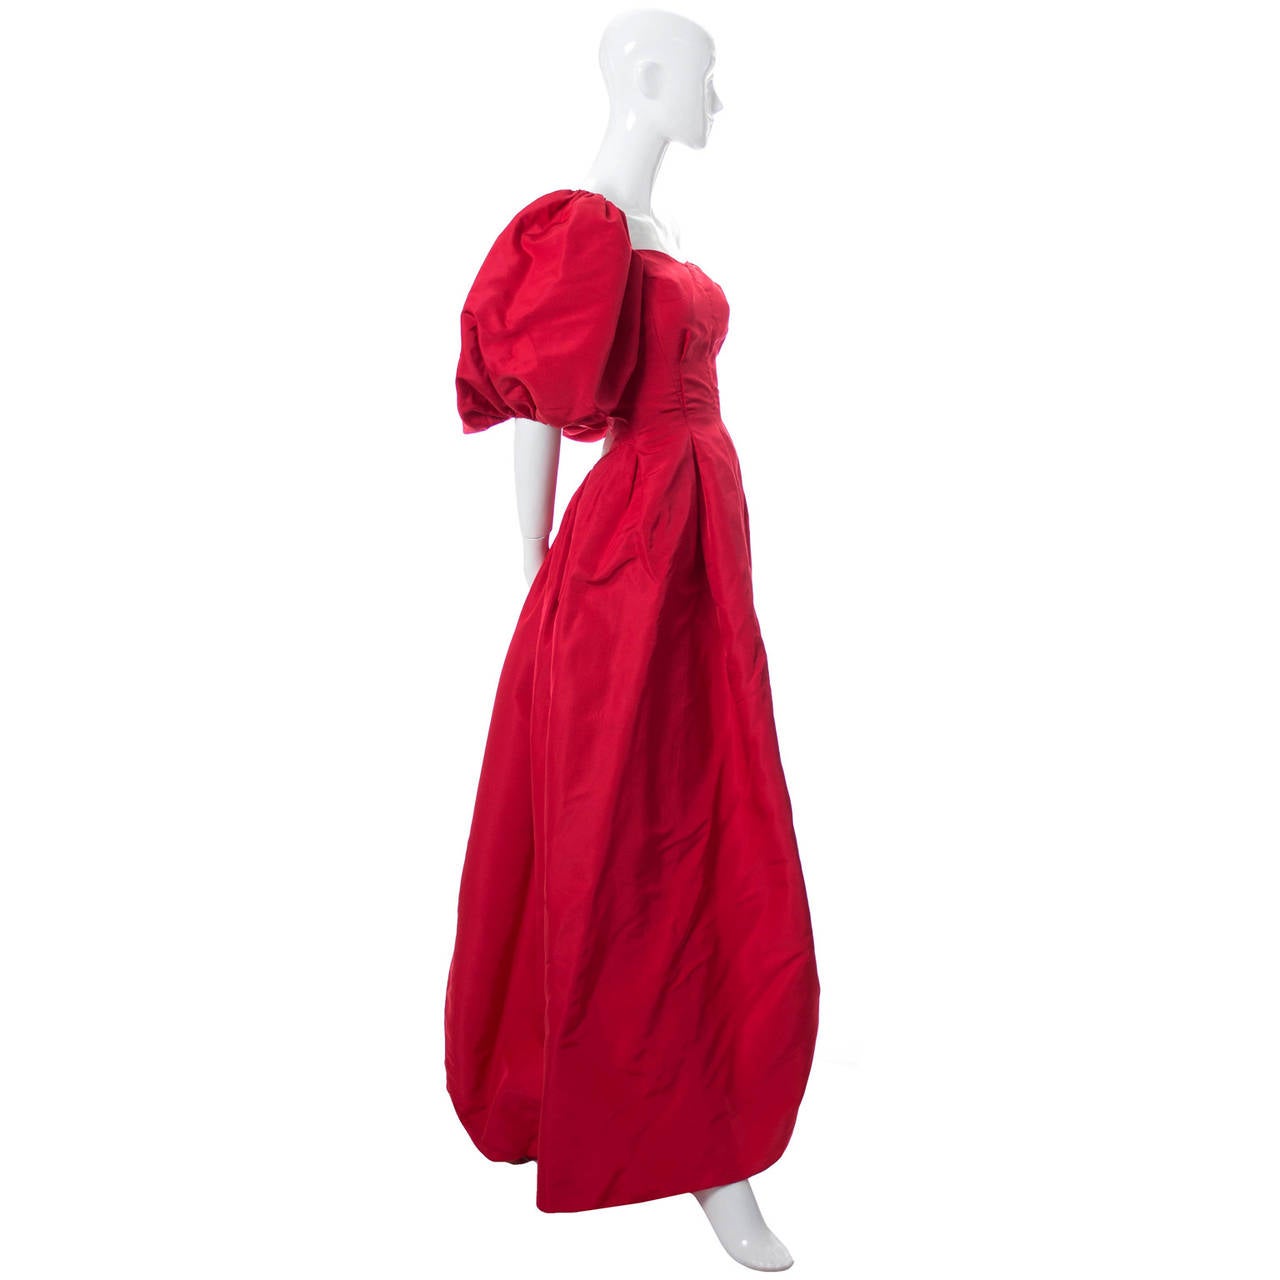 This beautiful red satin ballgown is by designer Rosalie MaCrini and it came from an estate of vintage clothing that included many of the most important American higher end mid century designers.  Rosalie MaCrini was a designer of formal and